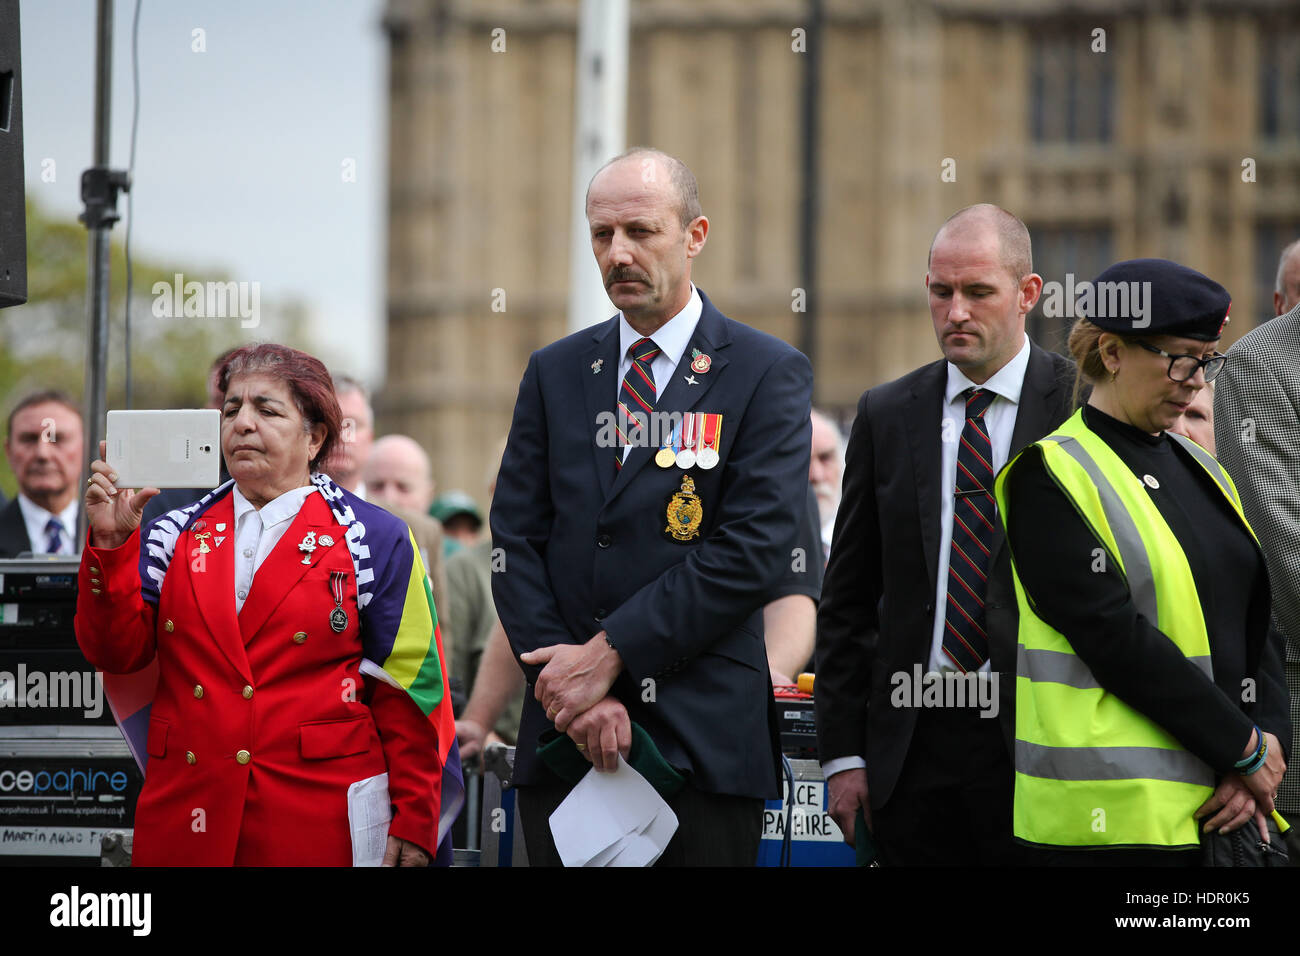 Former and serving members of the armed forces take part in a rally in support of support of Sgt Alexander Blackman, also known as 'Marine A', who was given a life sentence after being convicted of murdering a wounded Taliban fighter.  Featuring: Leader B Stock Photo